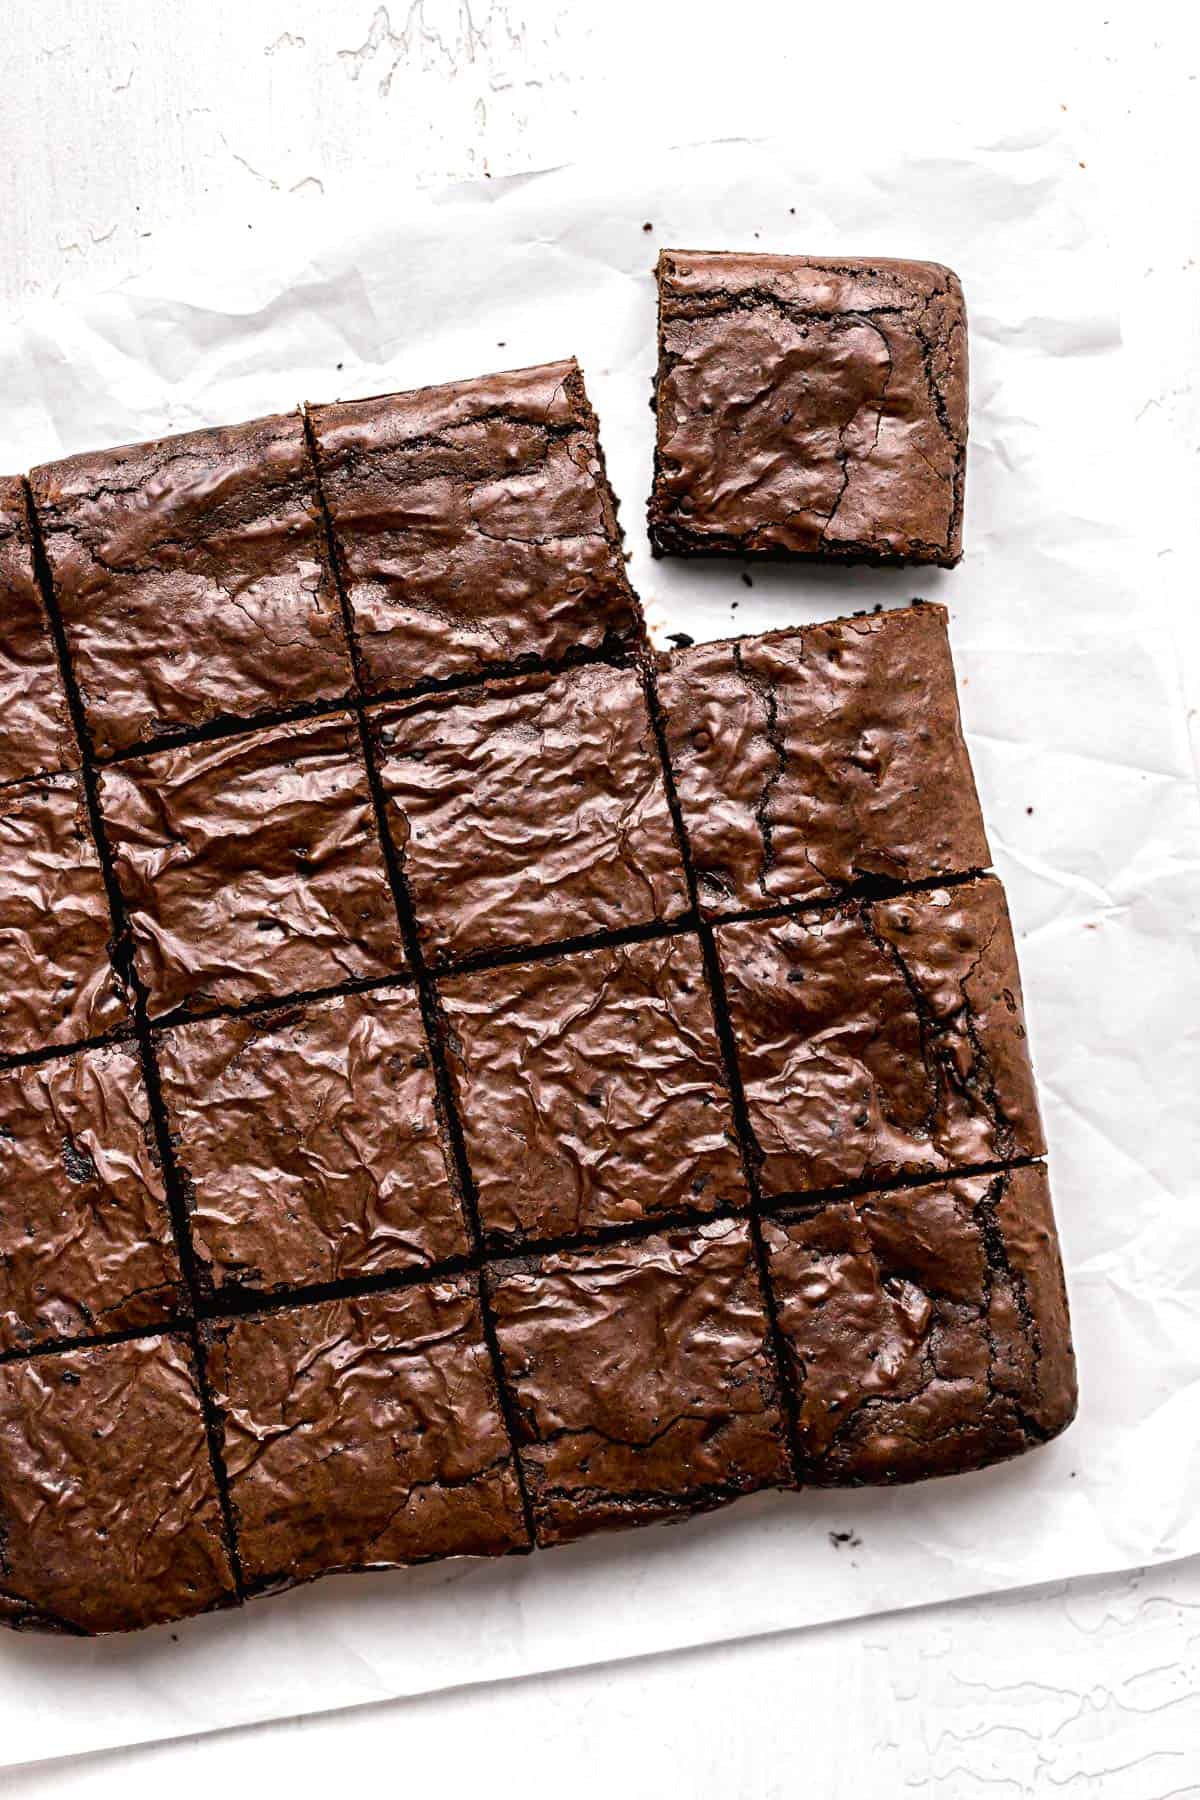 olive oil brownies cut into squares on parchment paper.